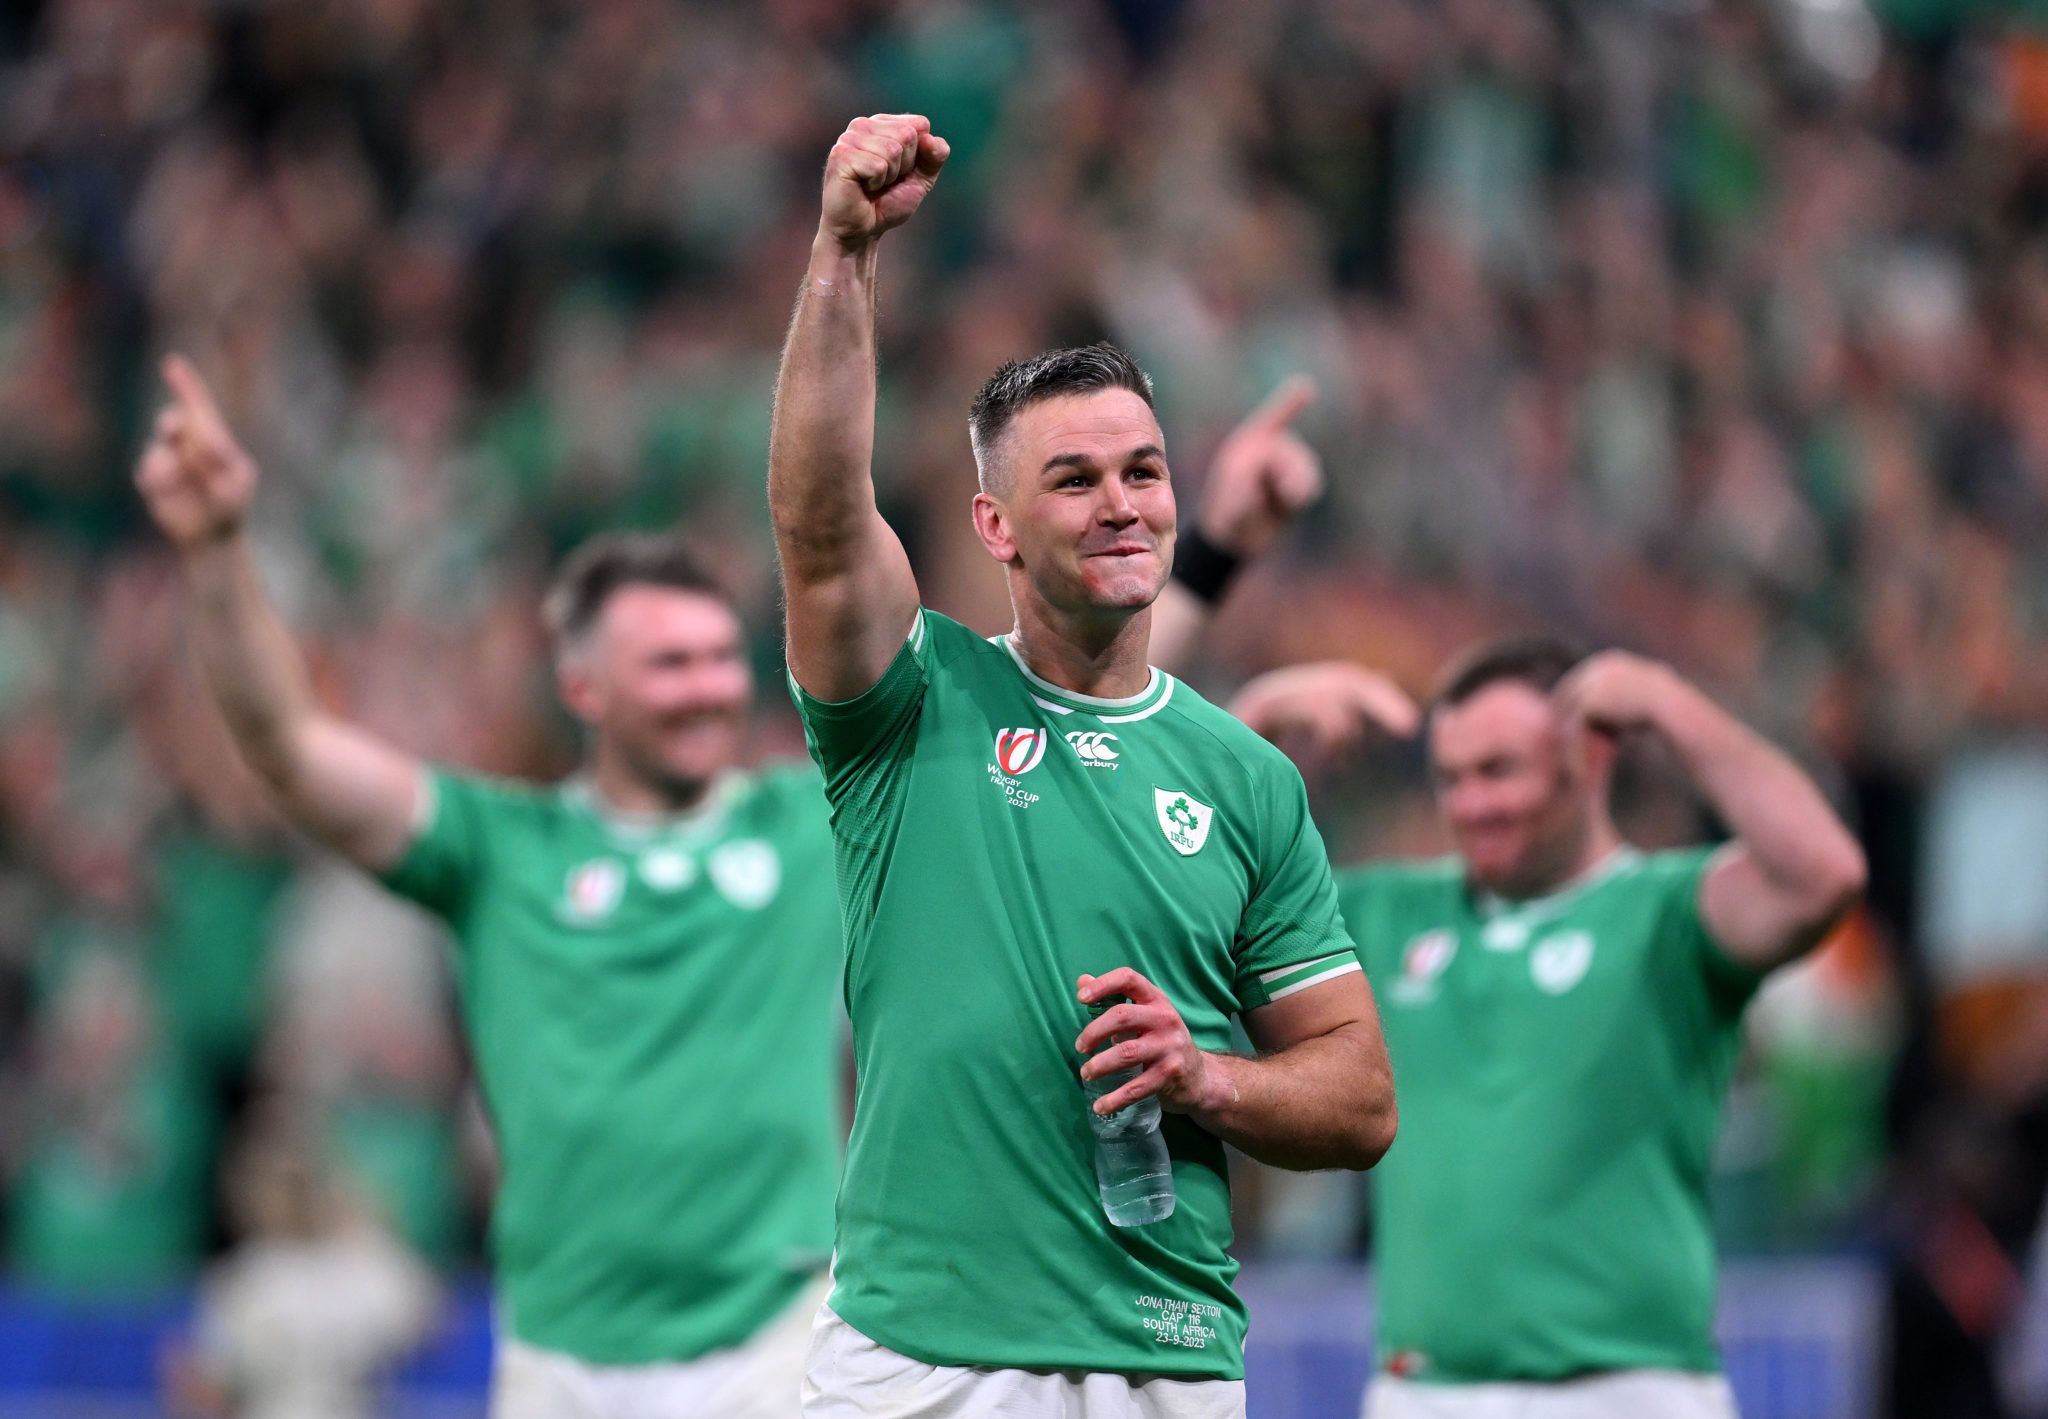 New Zealand pundit calls out Irish rugby stars for lacking class and respect